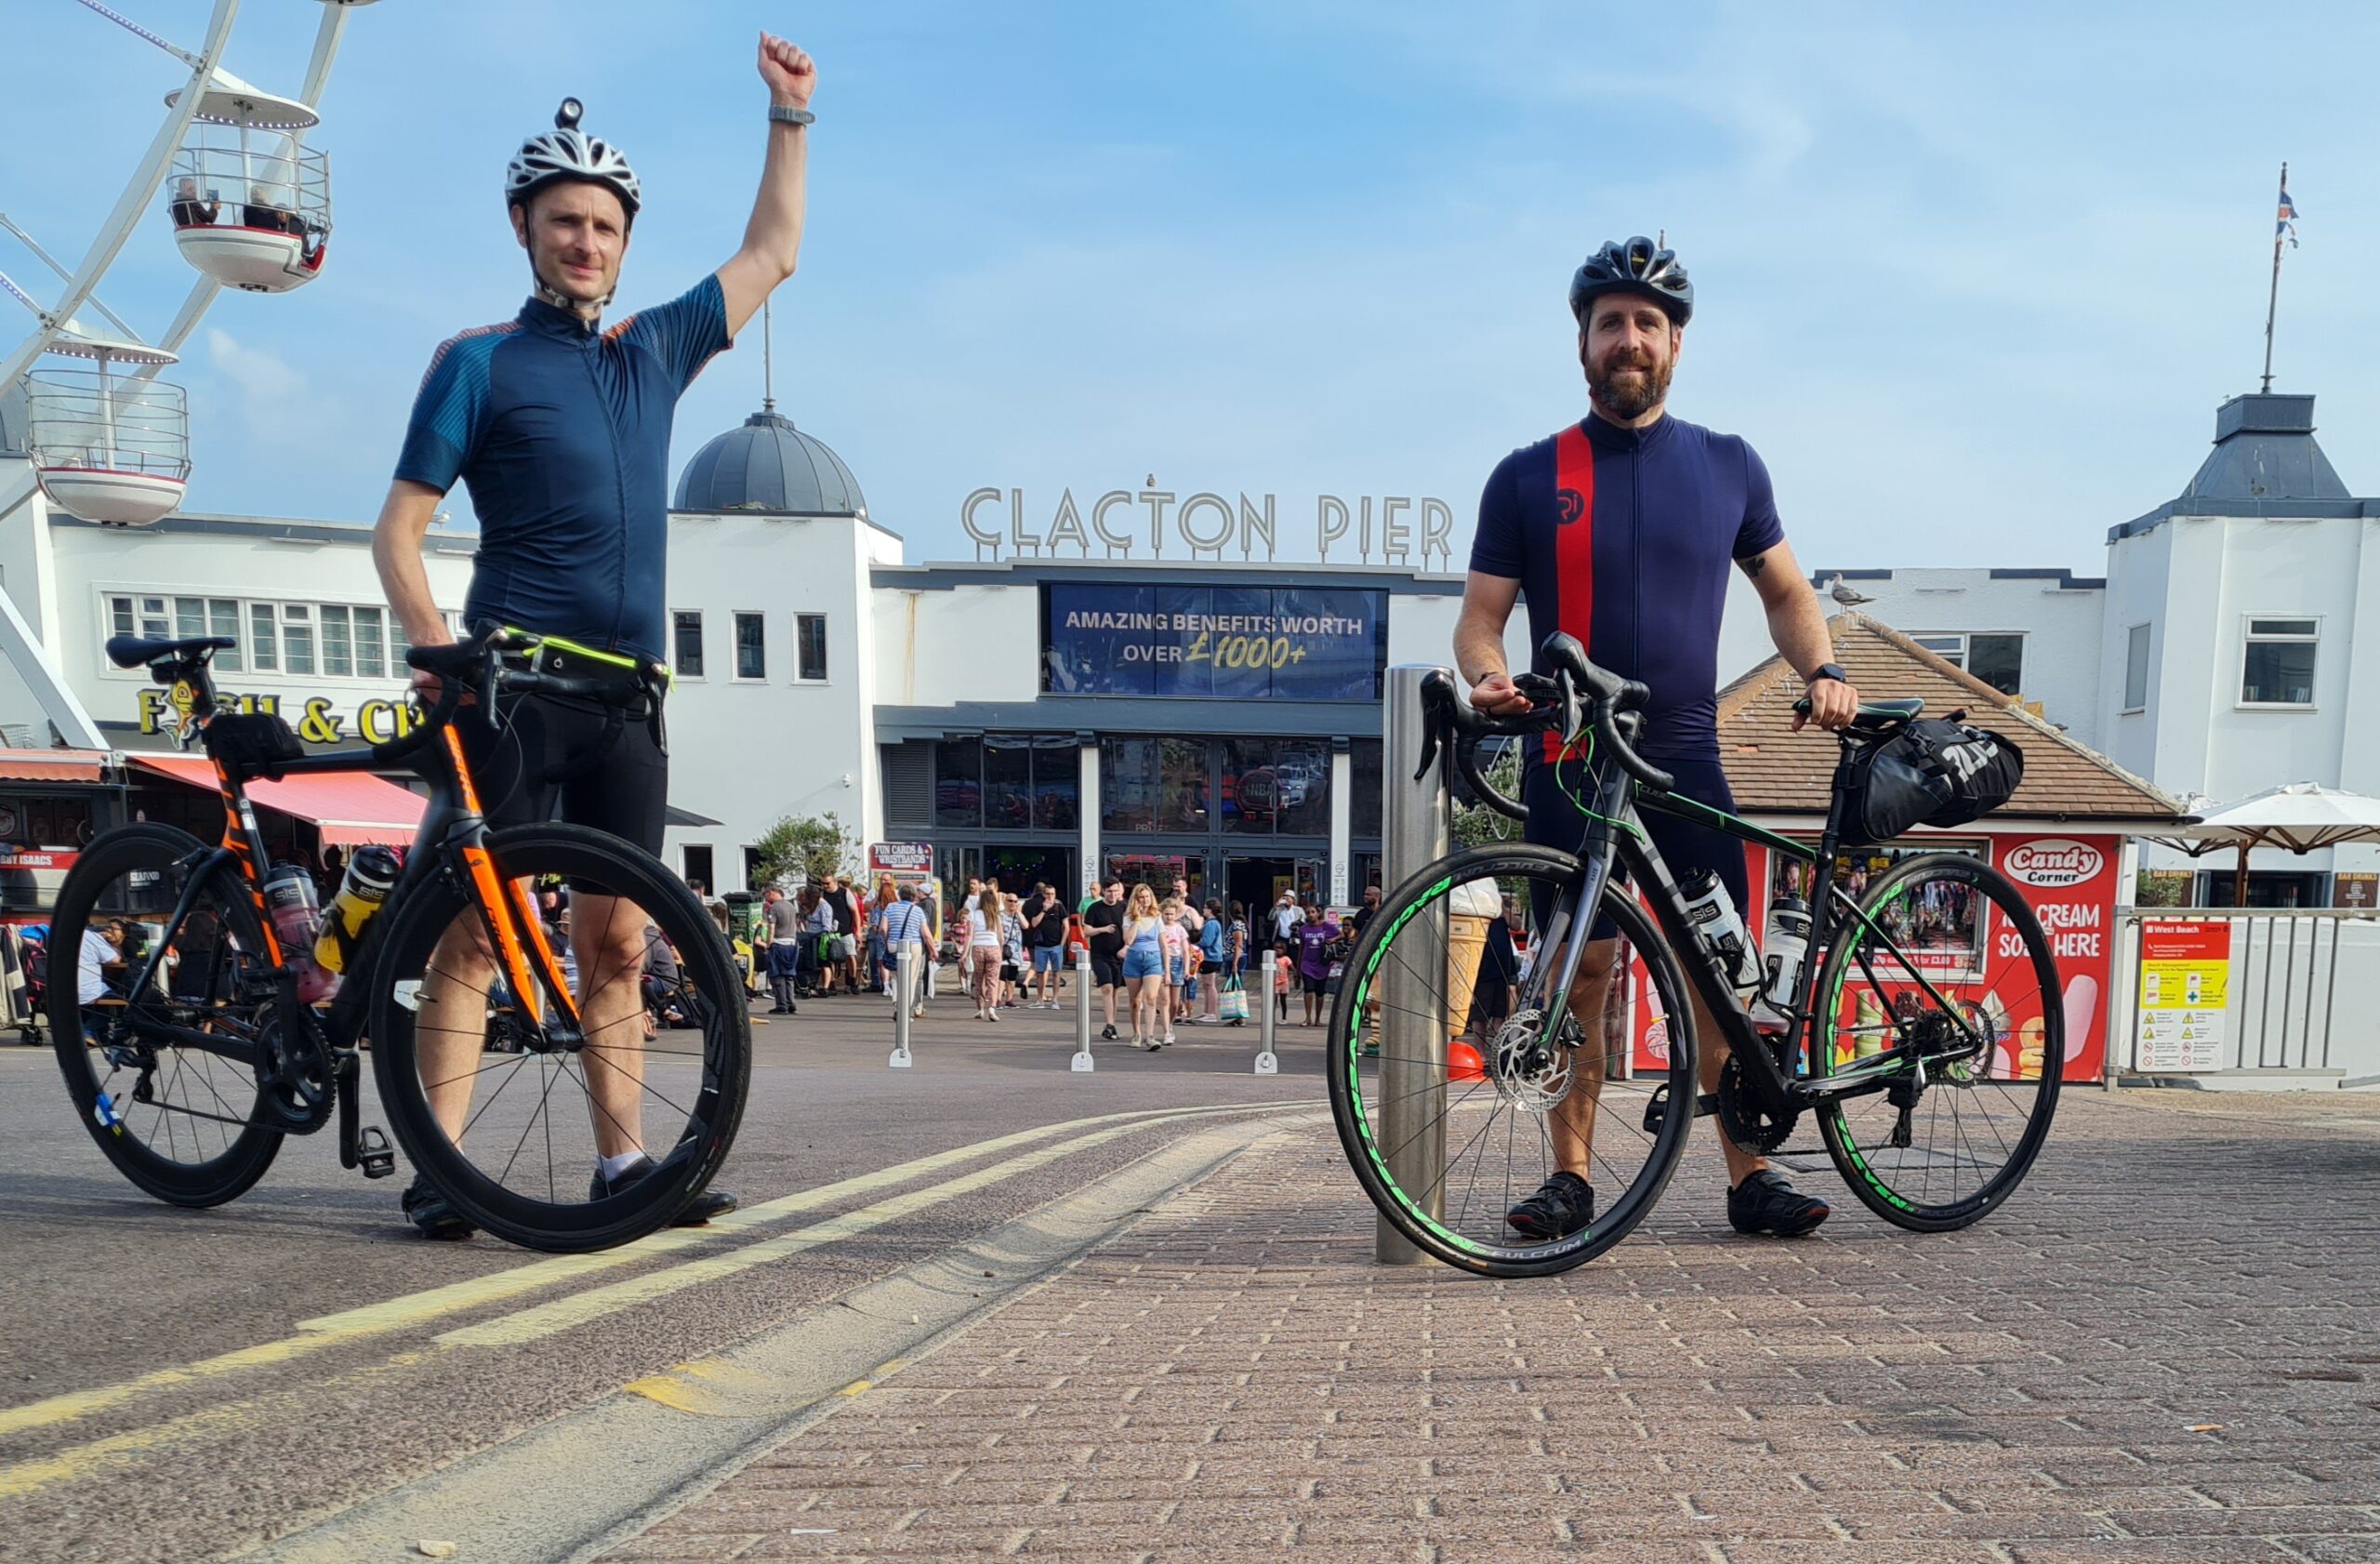 Pedal Power to raise awareness about mental health